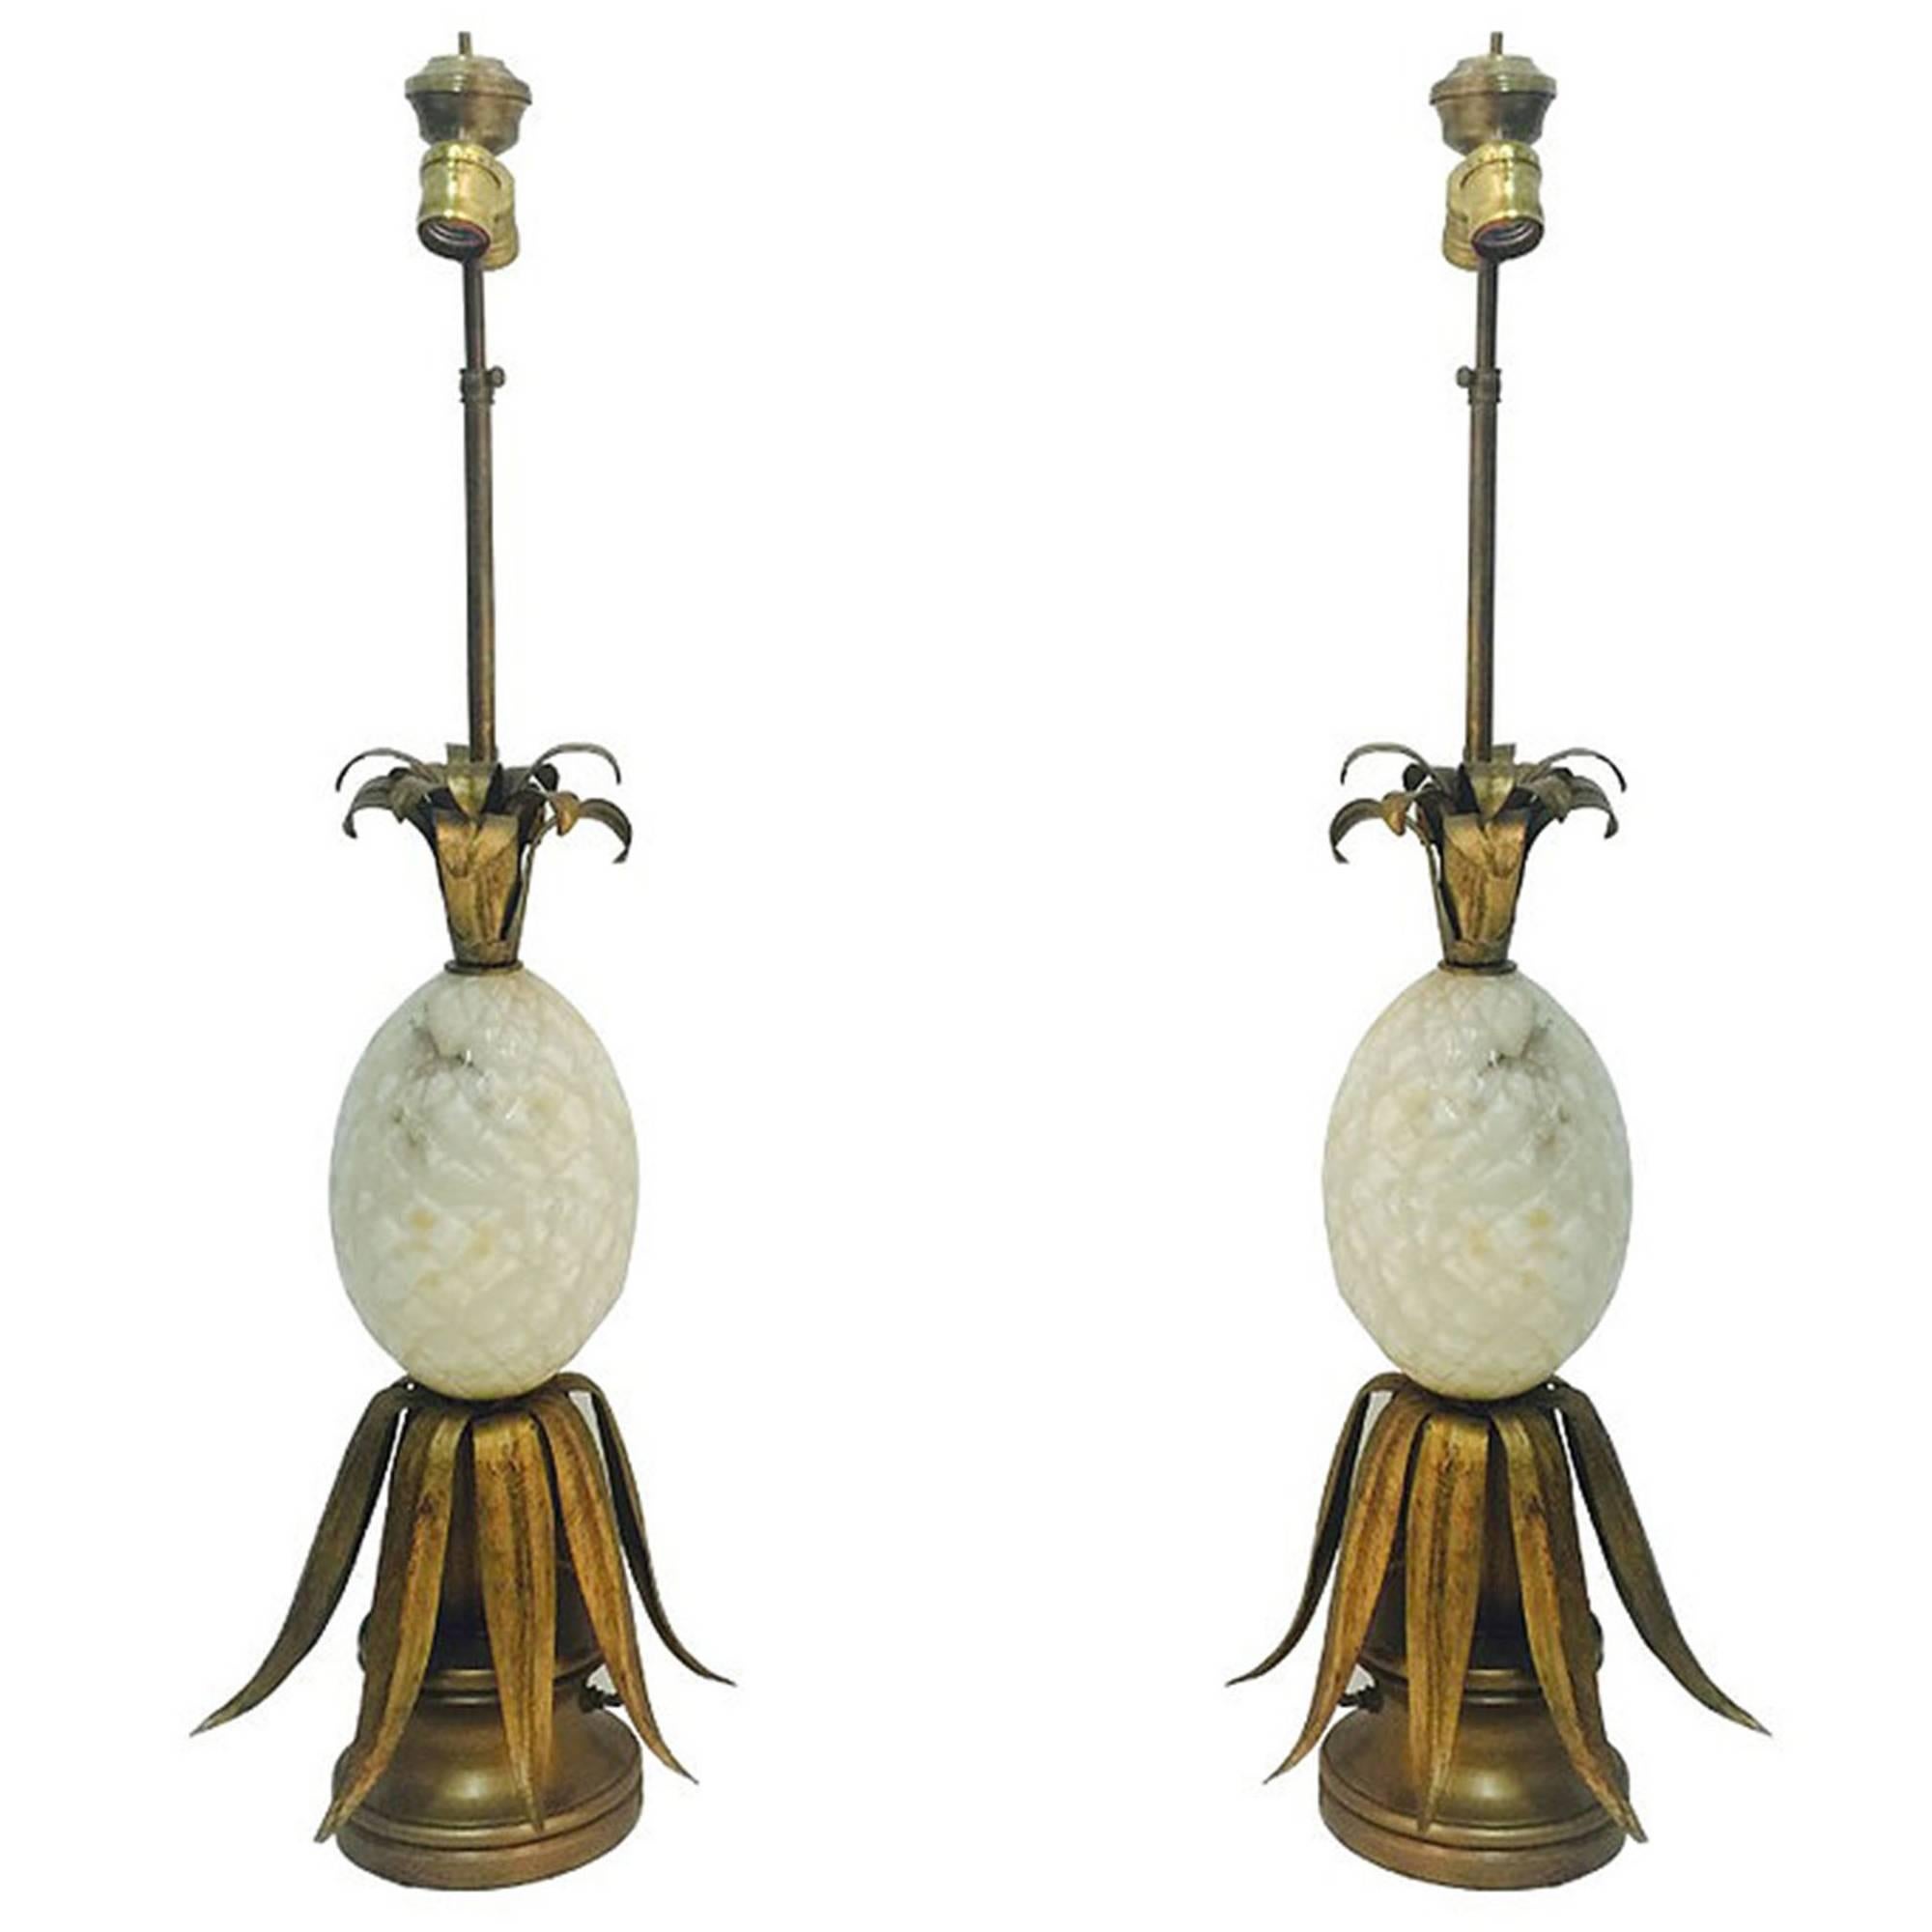 Pair of Alabaster Pineapple Table Lamps